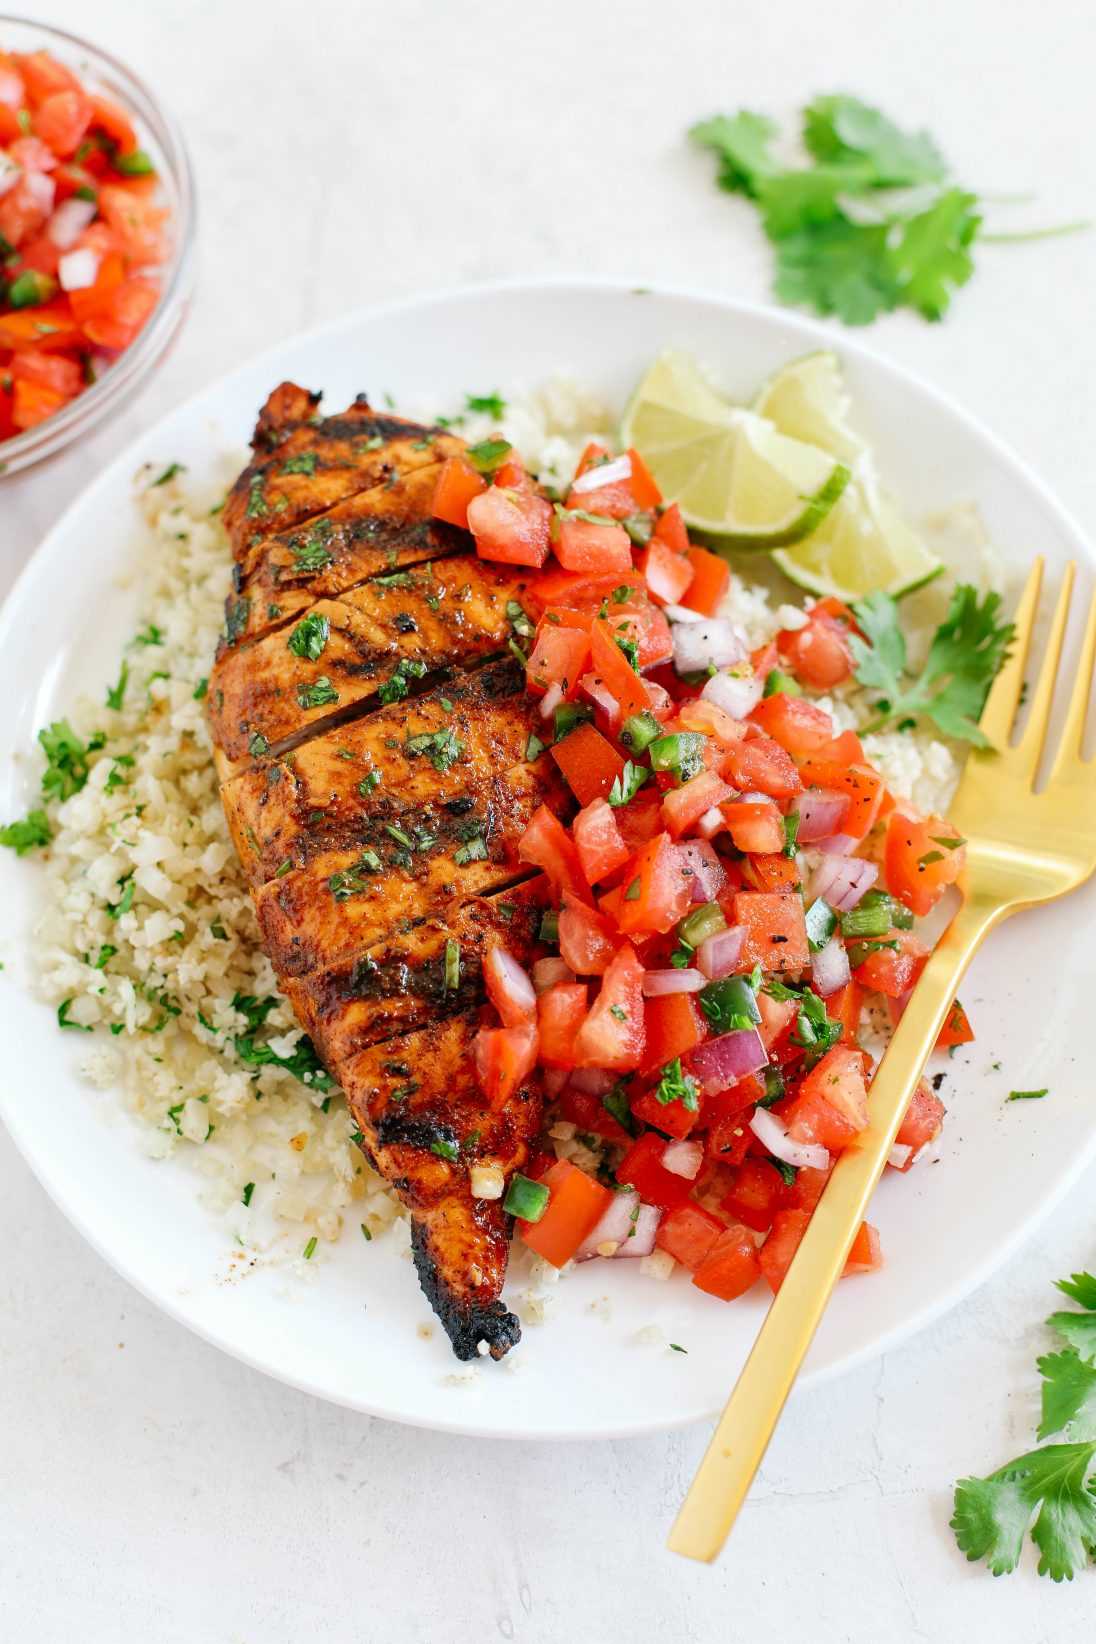 This Chili Lime Grilled Chicken is juicy, flavorful and marinated in a delicious combination of spices making this the perfect summer recipe!  Pair it with fresh salsa and cauliflower rice for a complete meal! 